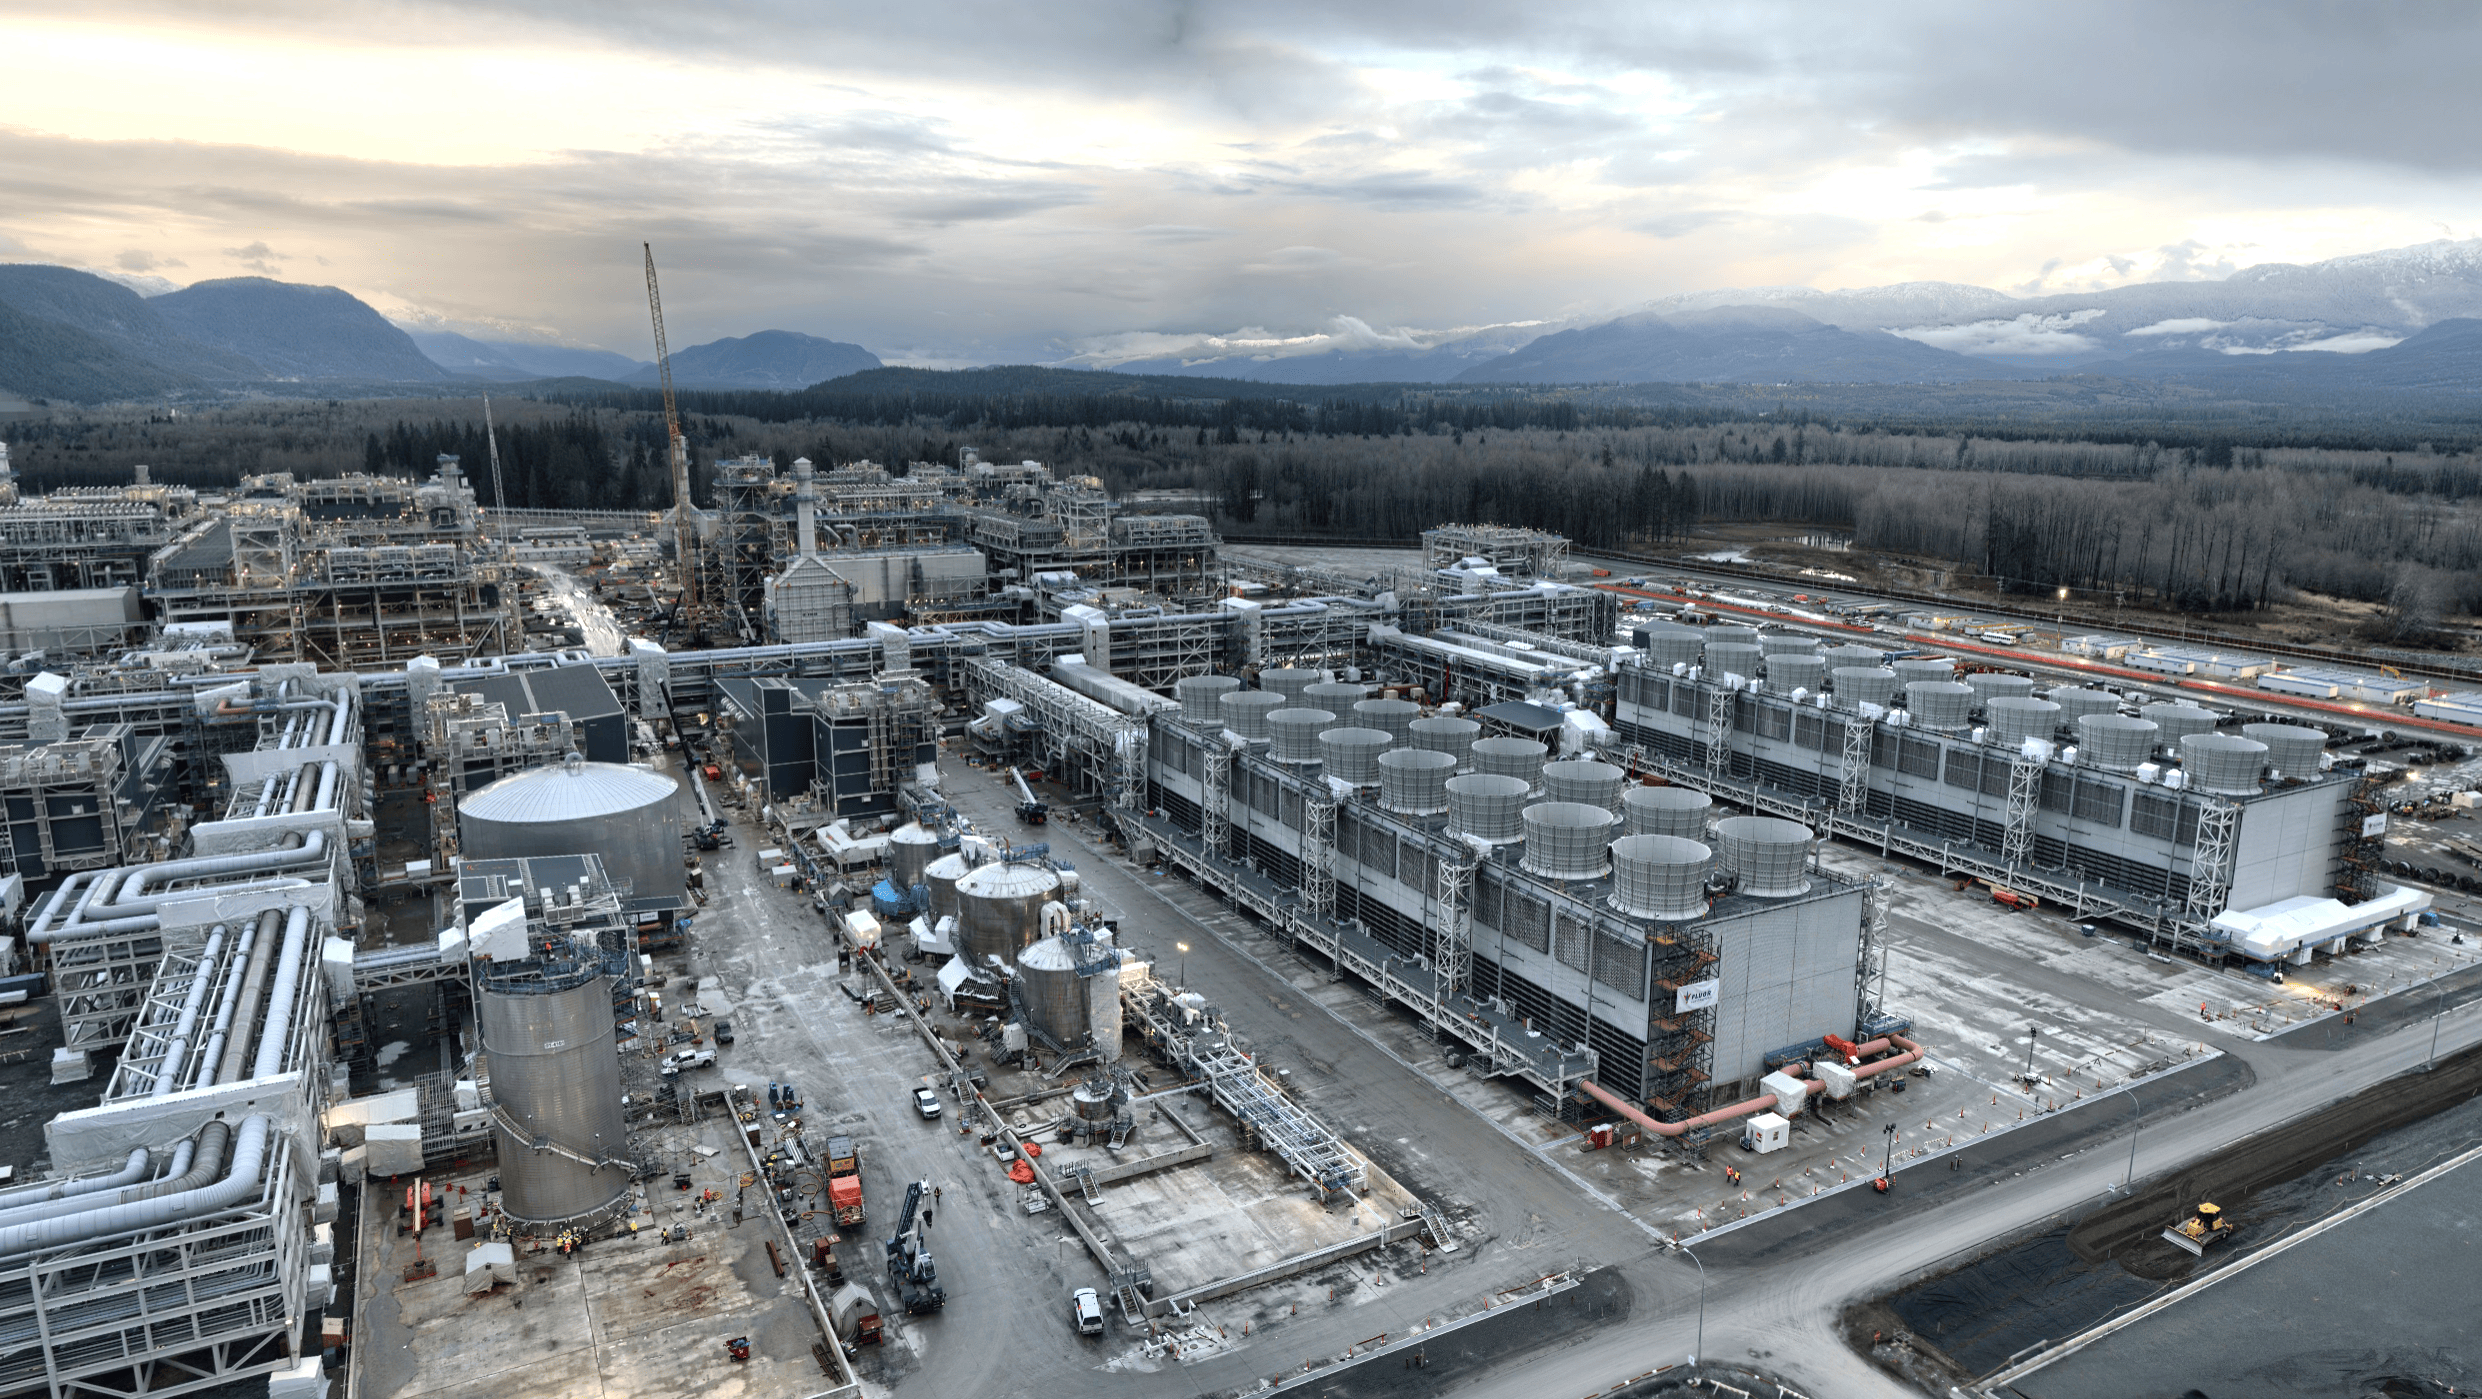 215 pre-fabricated modules containing liquefied natural gas processing equipment and support infrastructure comprise LNG Canada’s export terminal in Kitimat, British Columbia.